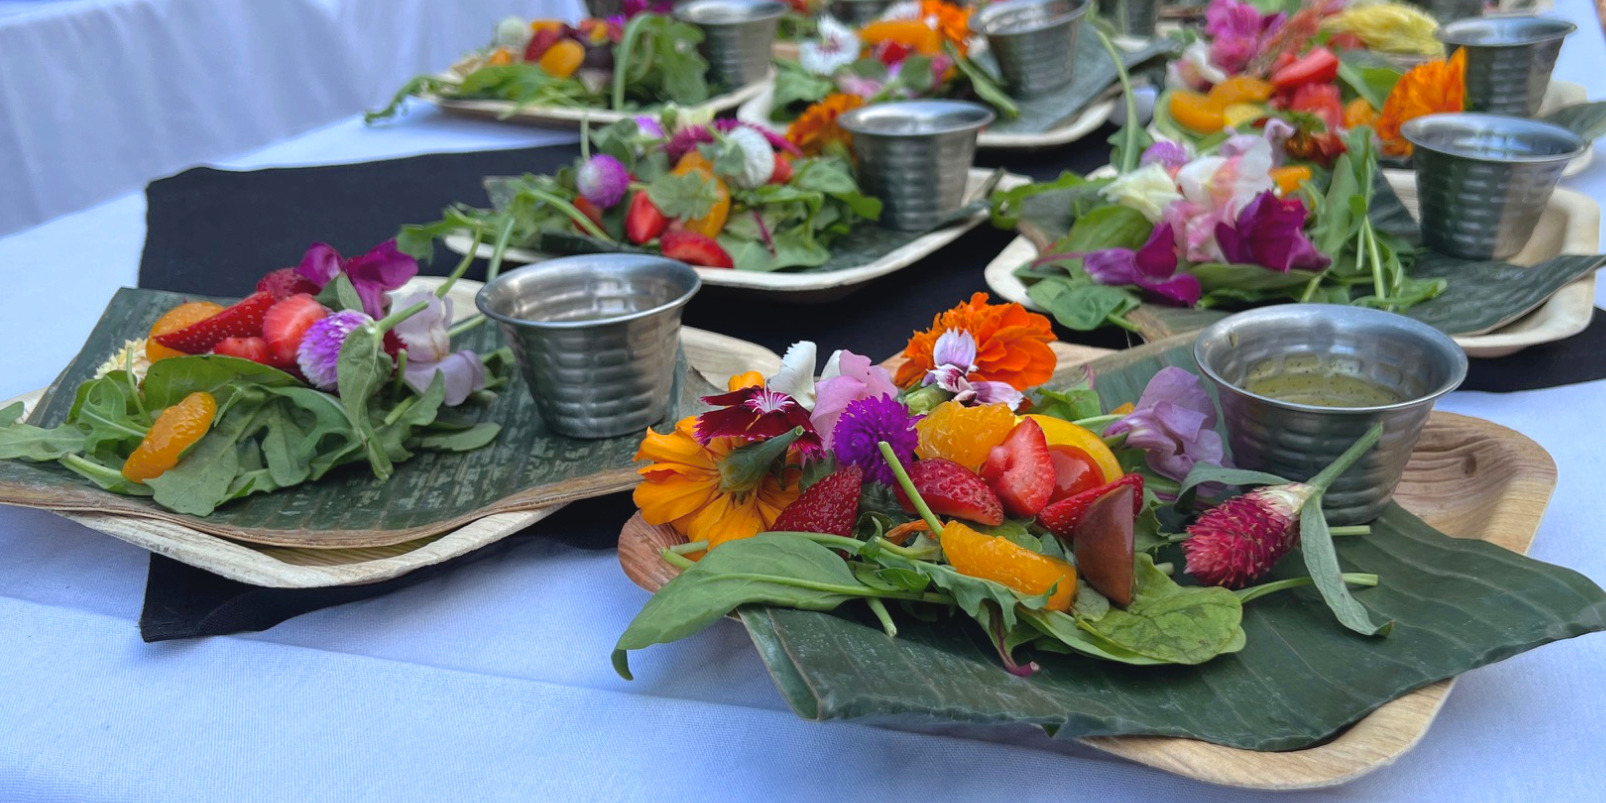 On the table at Maize's tequila dinner, there are several summer salads plated with brightly colored edible flowers ready to be served. Photo by Alyssa Buckley.